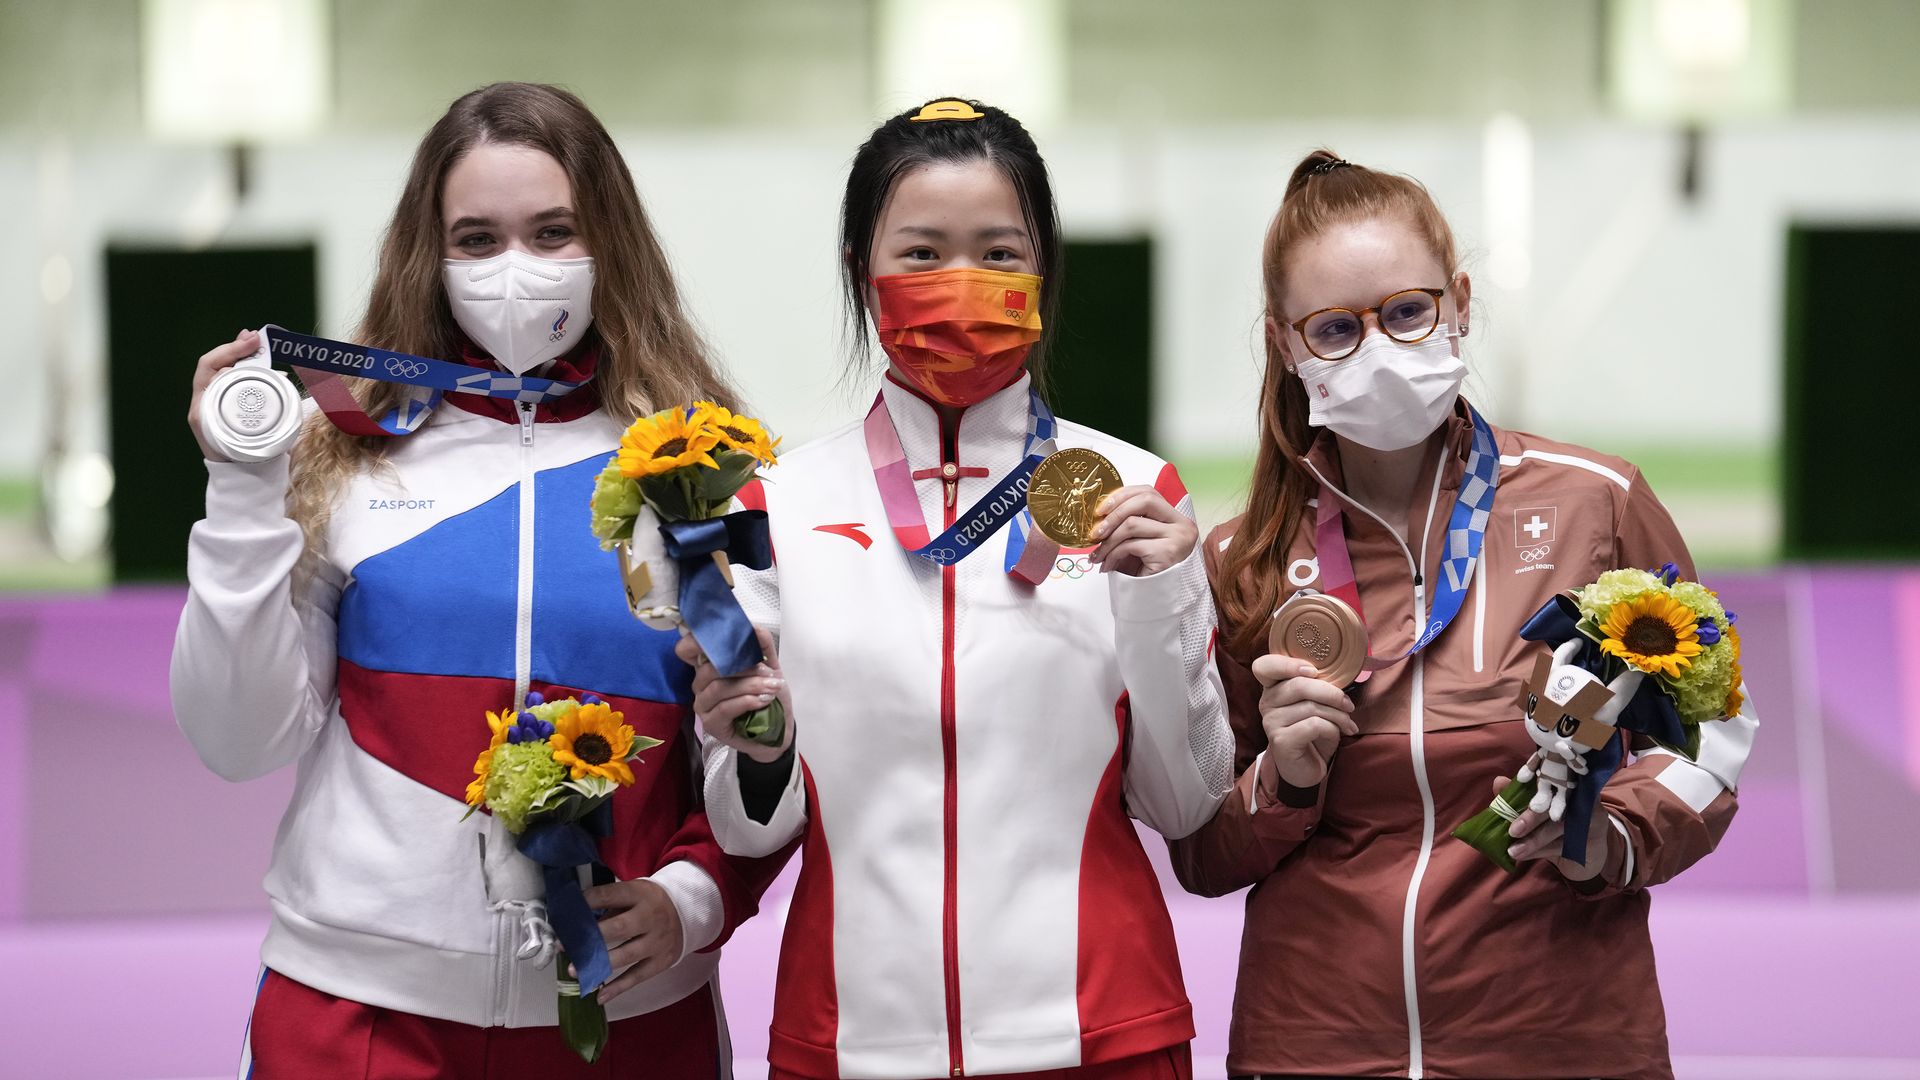 Silver medalist Anastasiia Galashina of Russia, gold medalist Yang Qian of China and bronze medalist Nina Christen of Switzerland celebrate on the podium after the 10m Air Rifle Women's Final